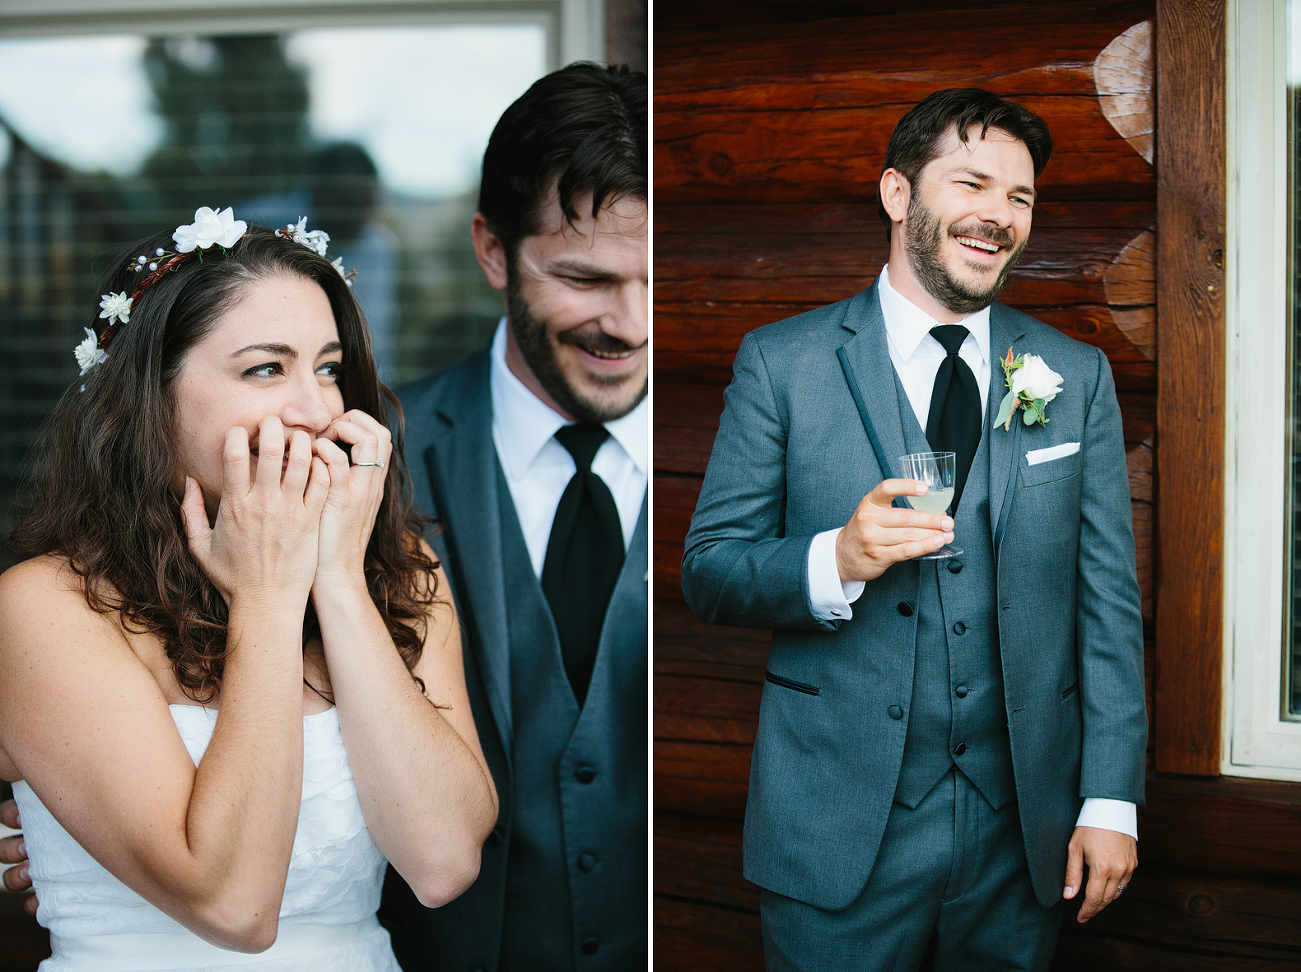 There was so much laughter and awesomeness at this wedding!